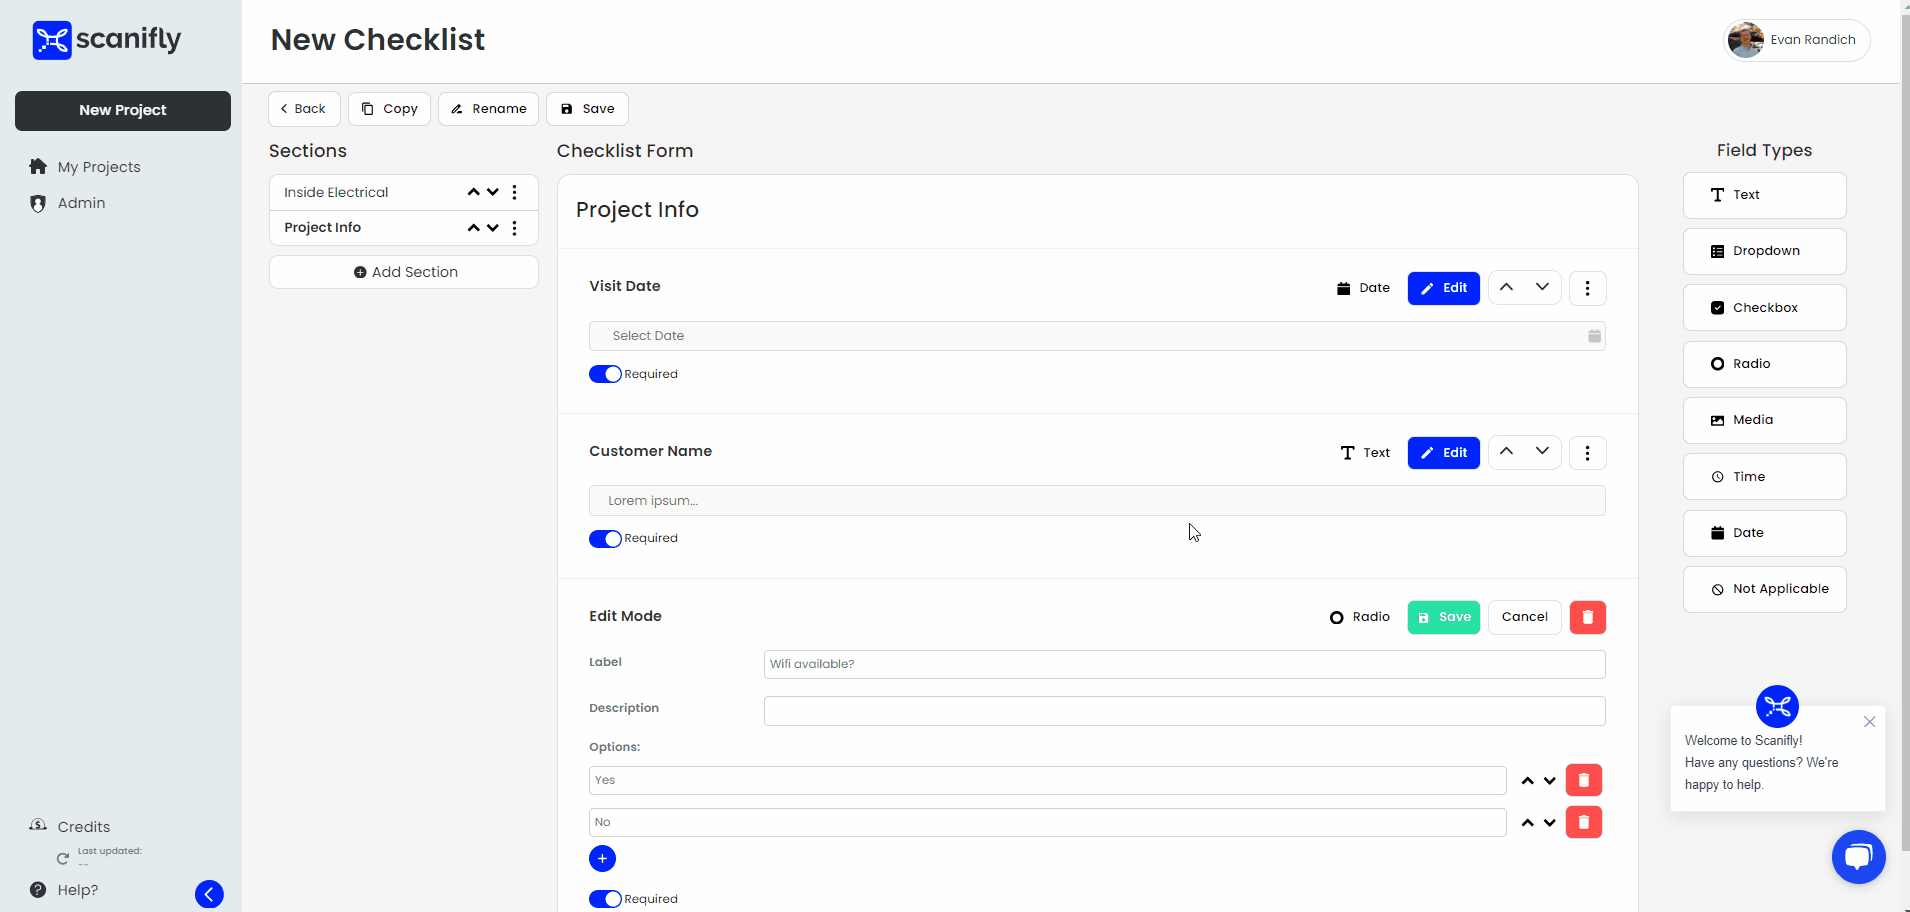 Moving fields and sections in checklists